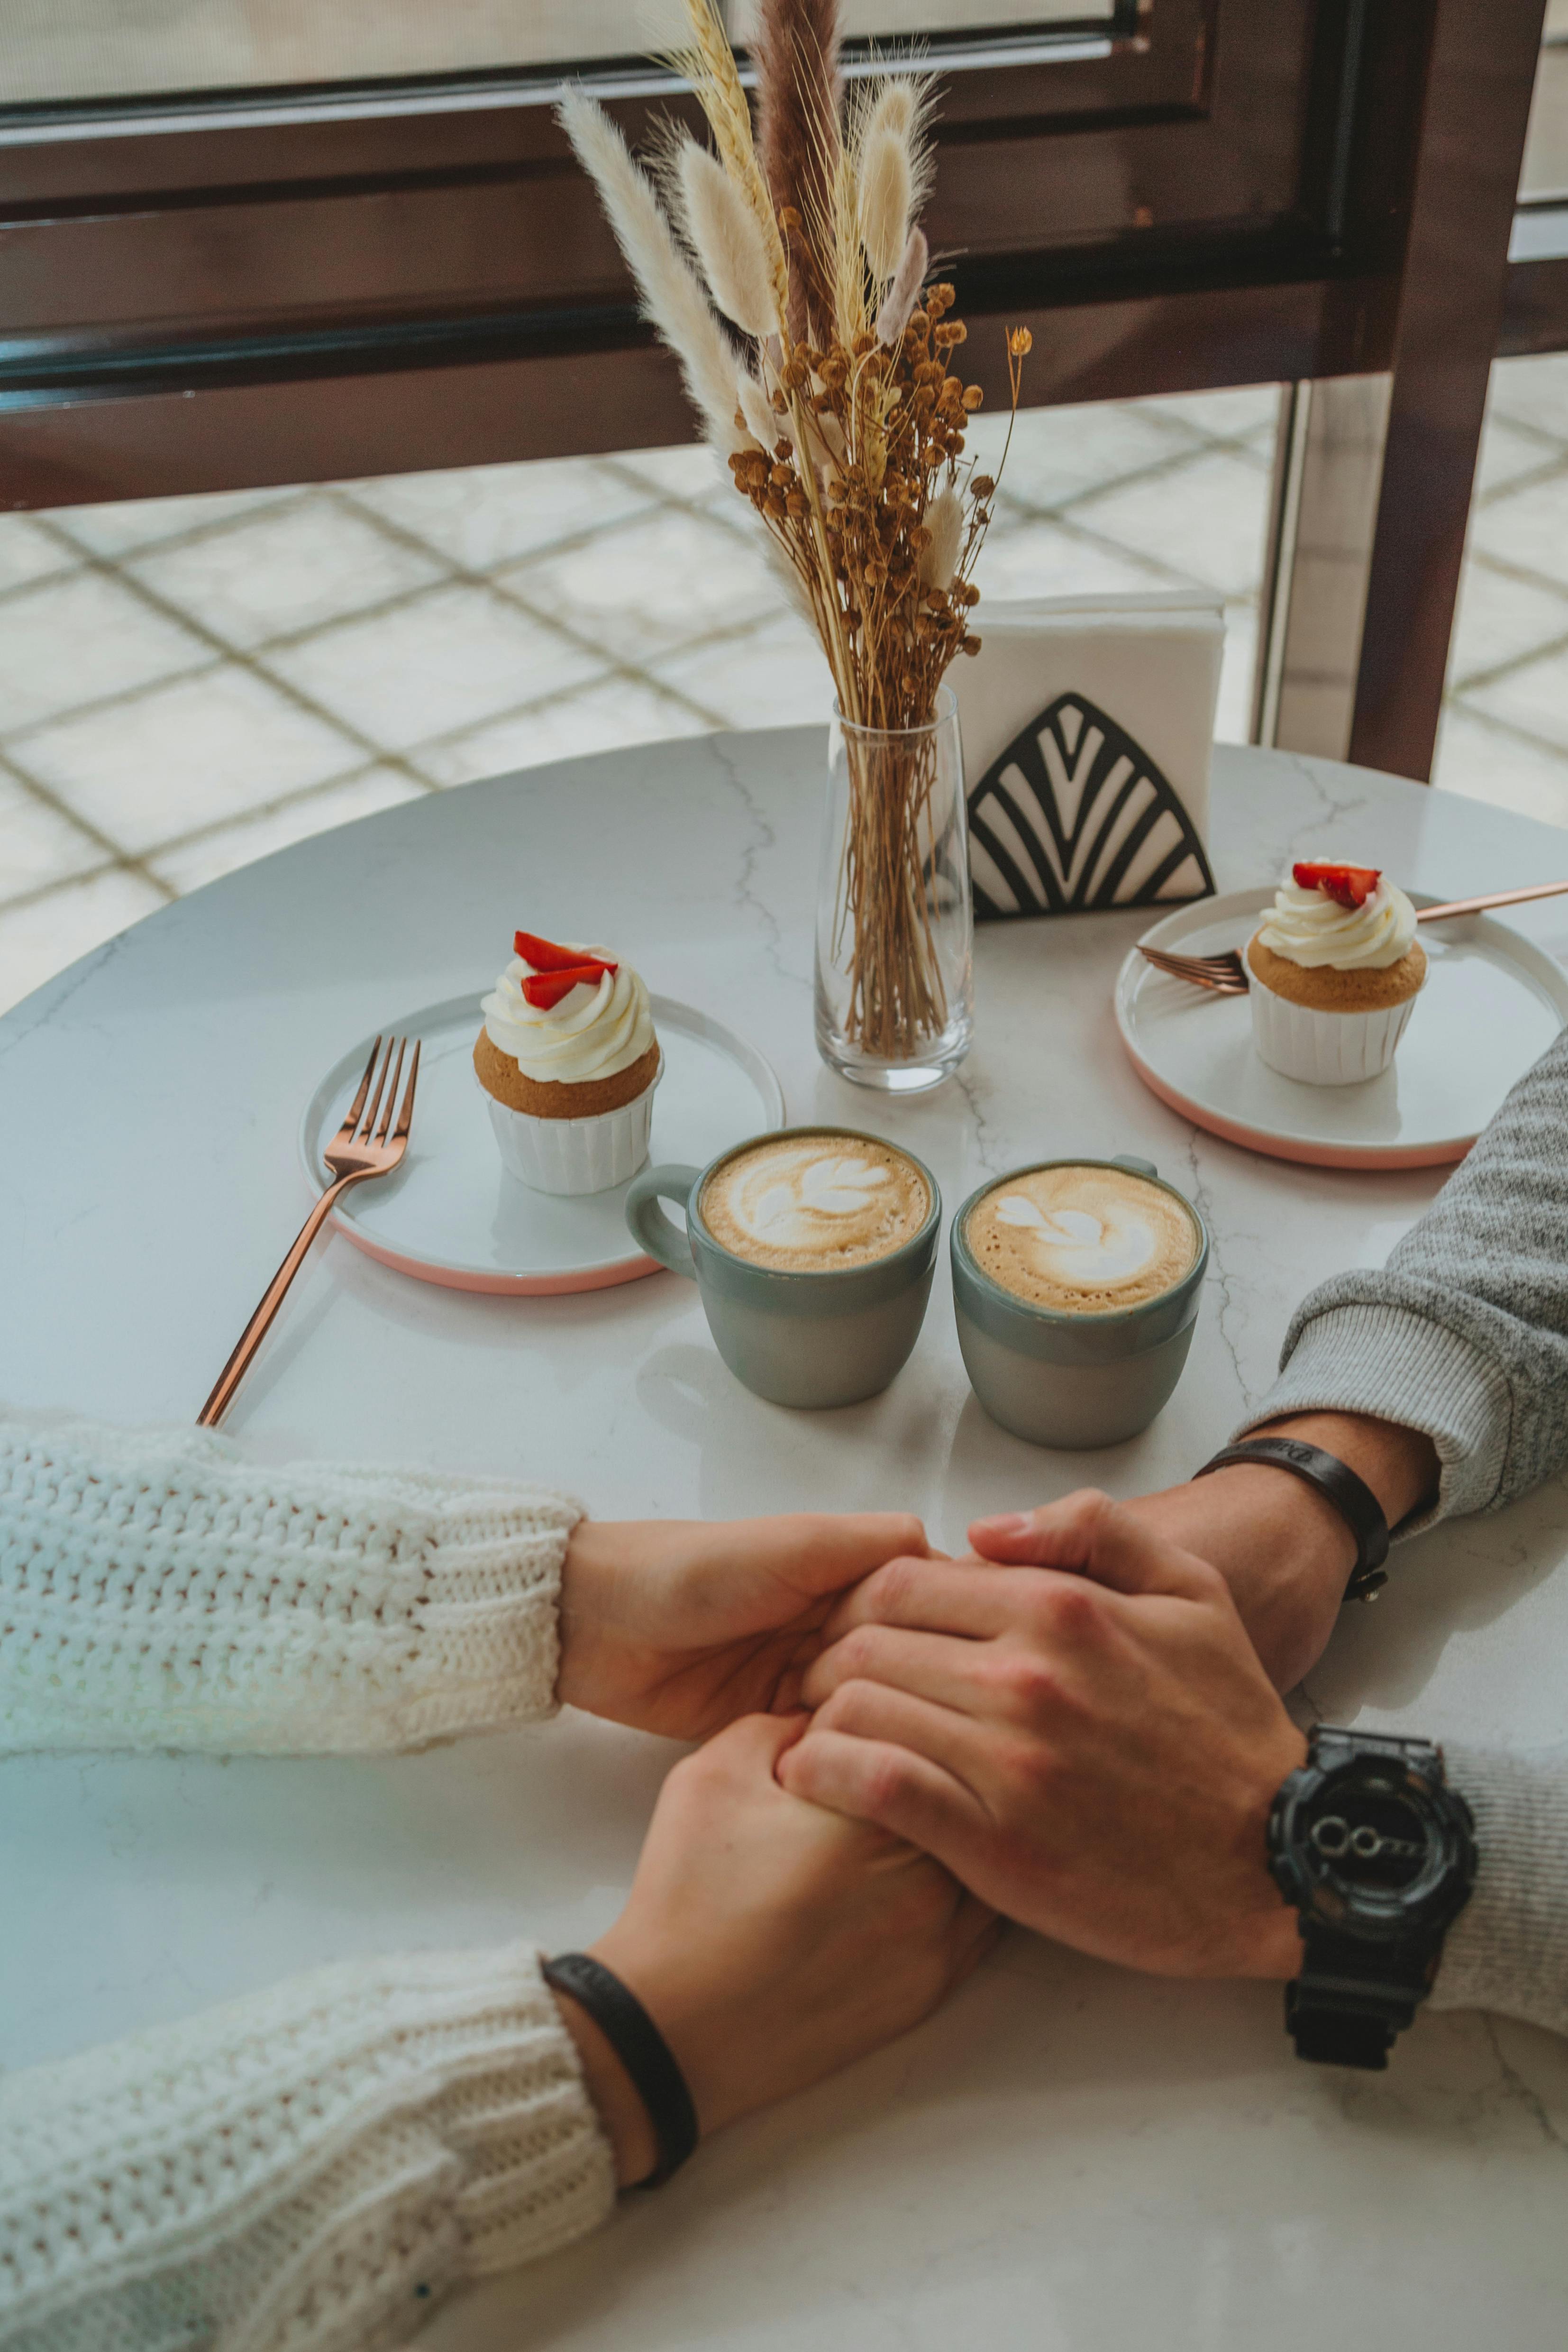 A couple holding hands while enjoying dessert and coffee | Source: Pexels